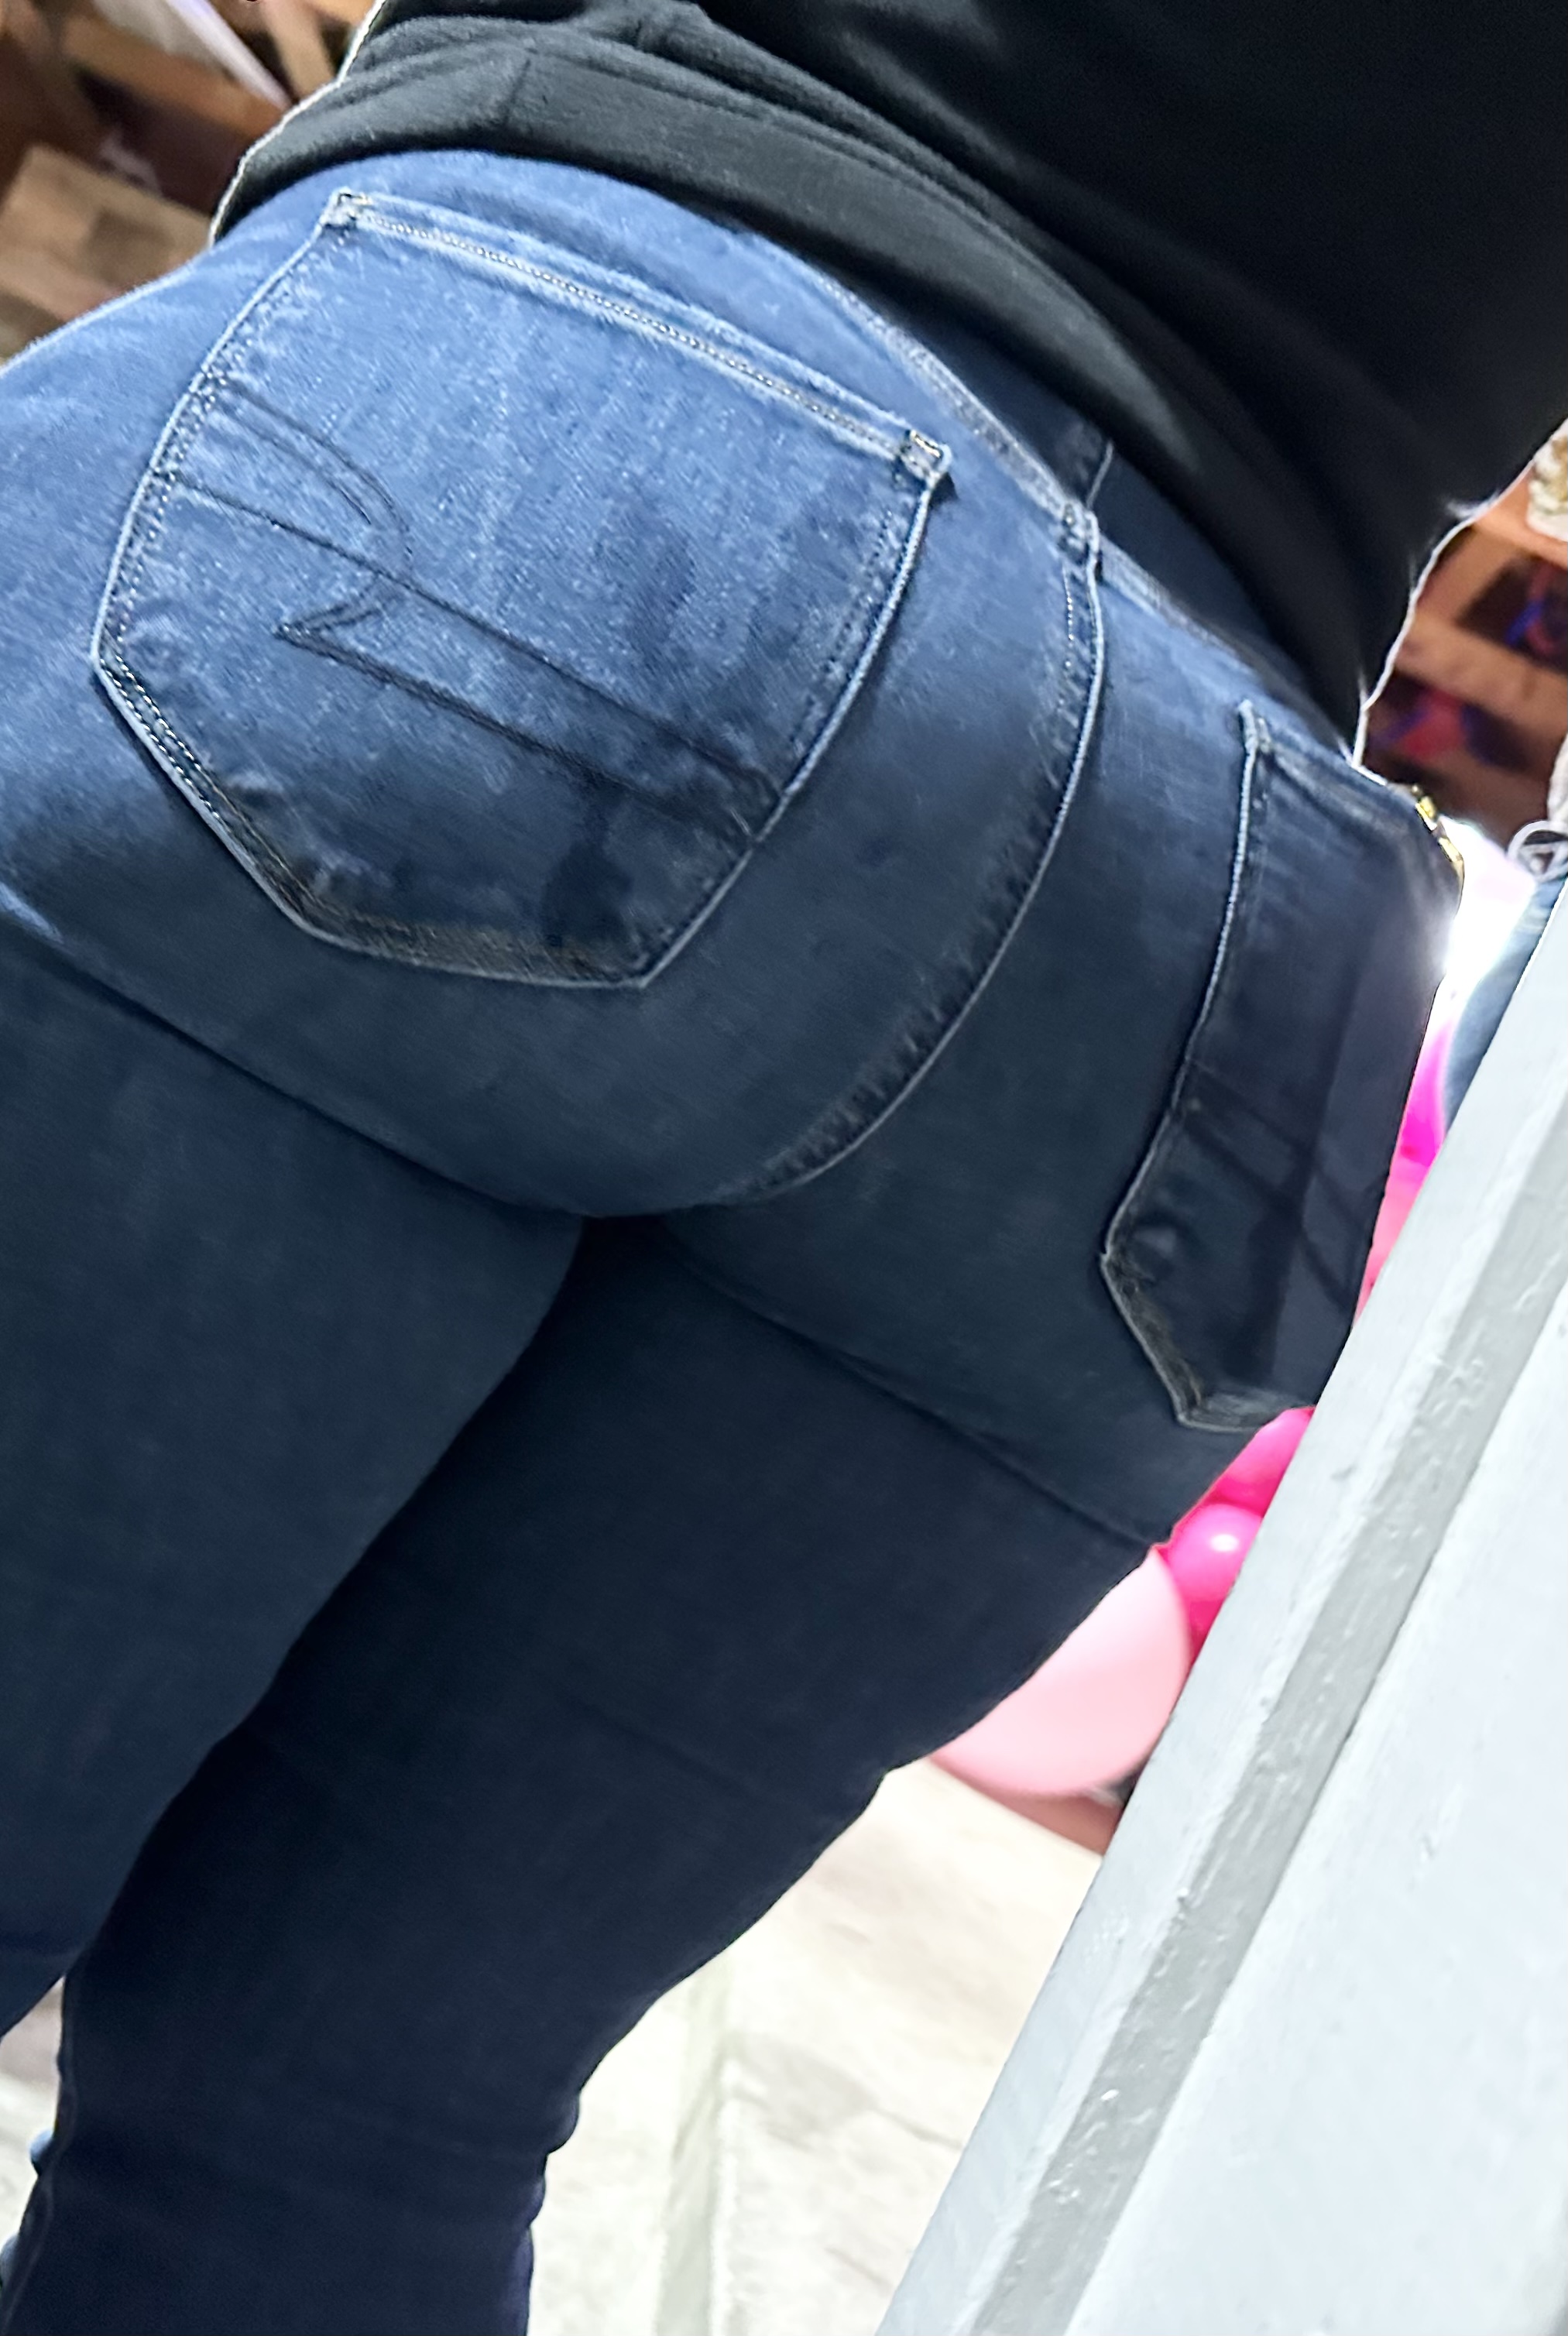 Thick Mami in Jeans - Tight Jeans - Forum